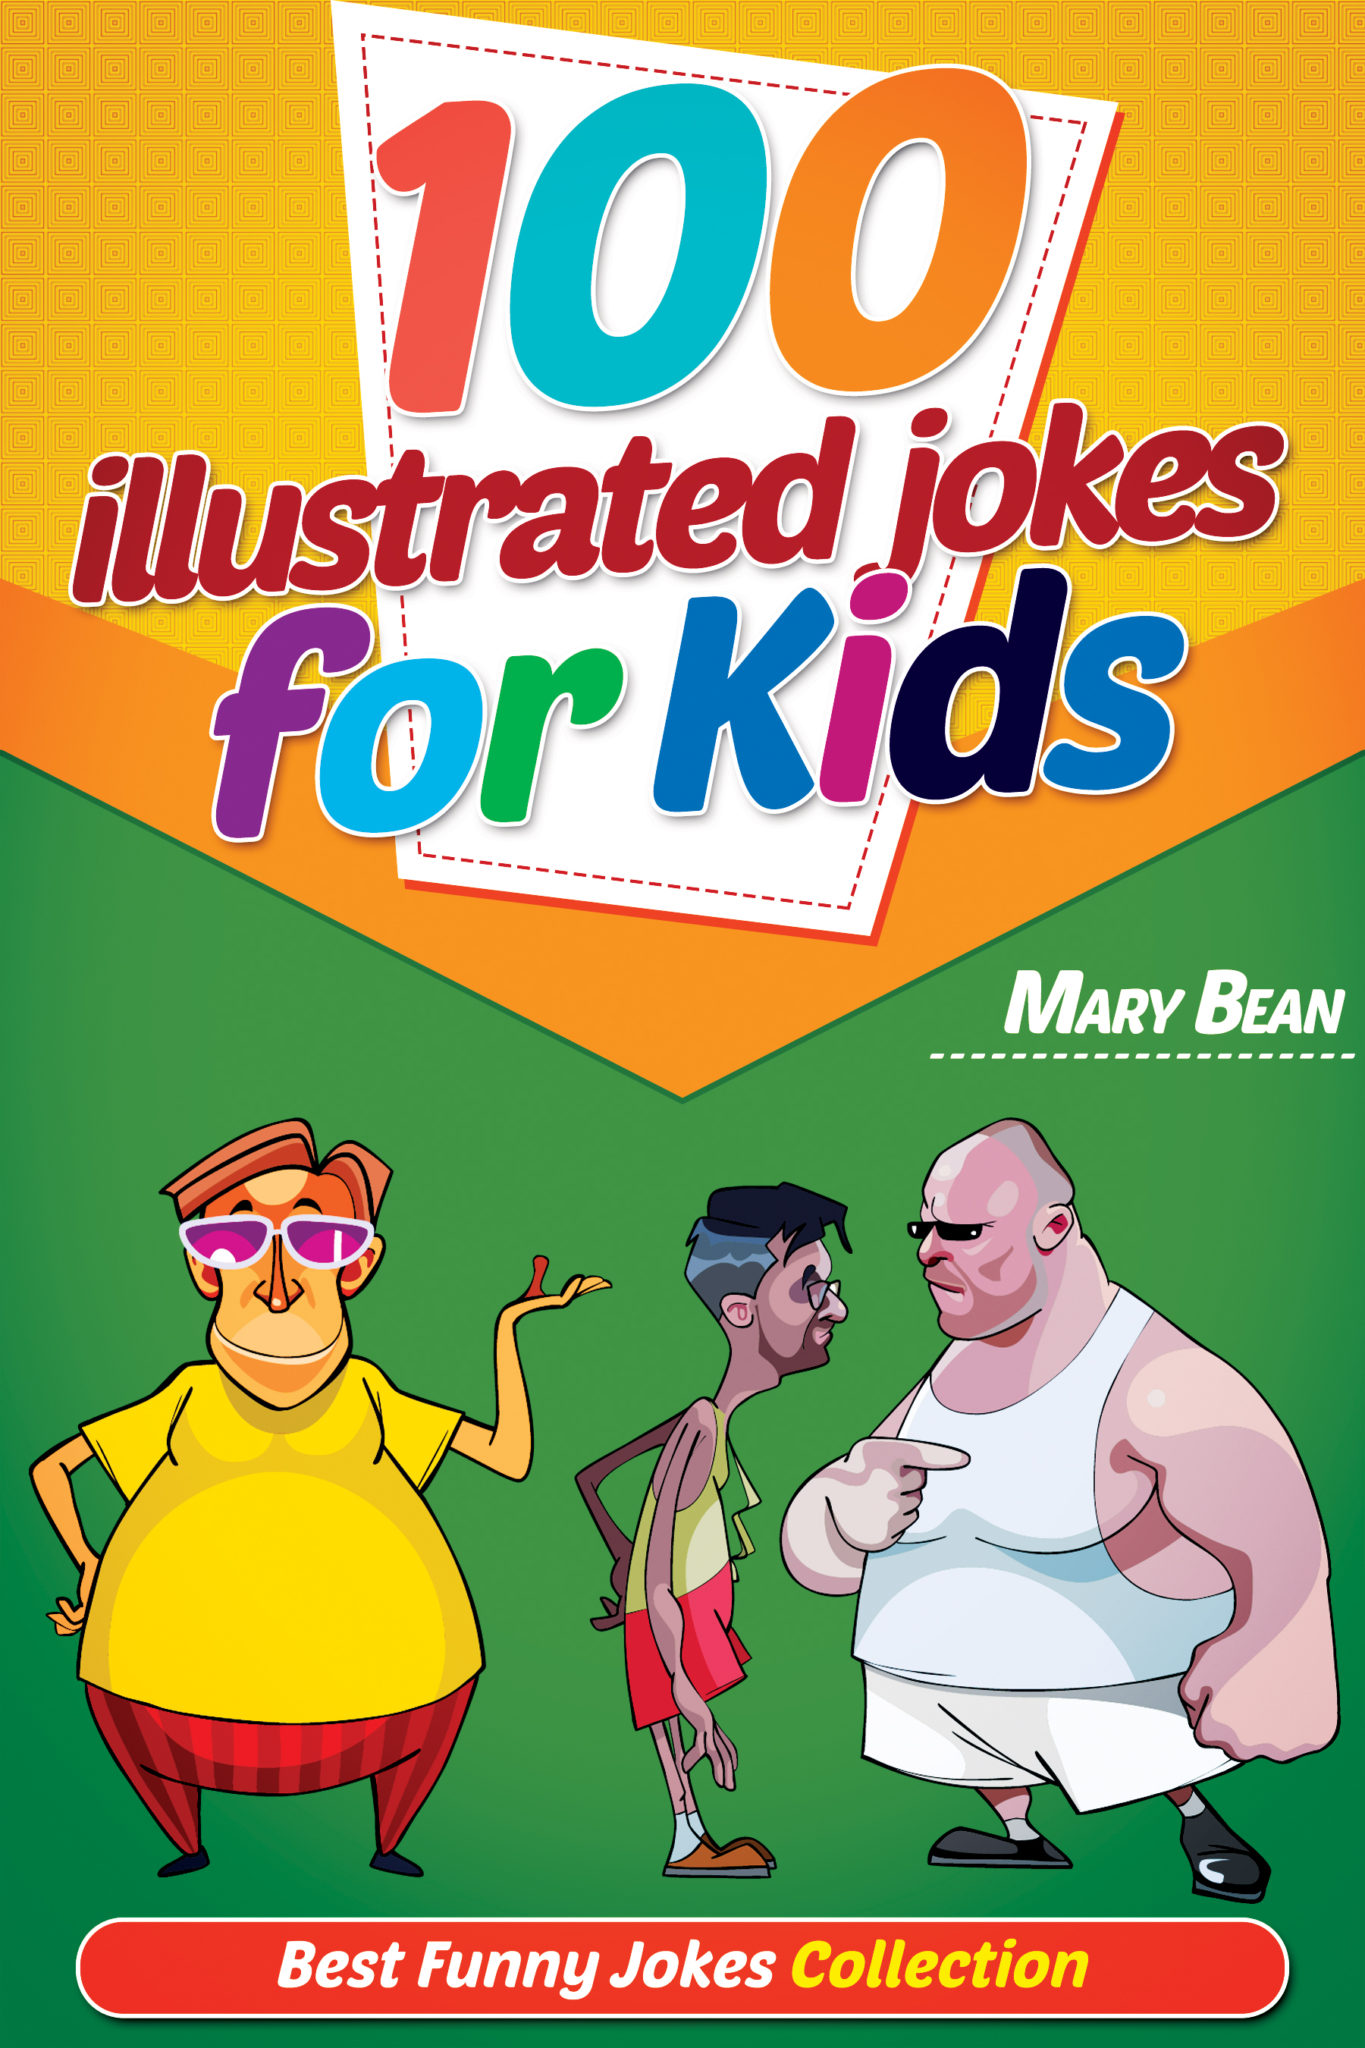 FREE: 100 Illustrated Jokes for Kids: Best Funny Jokes Collection by Mary Bean